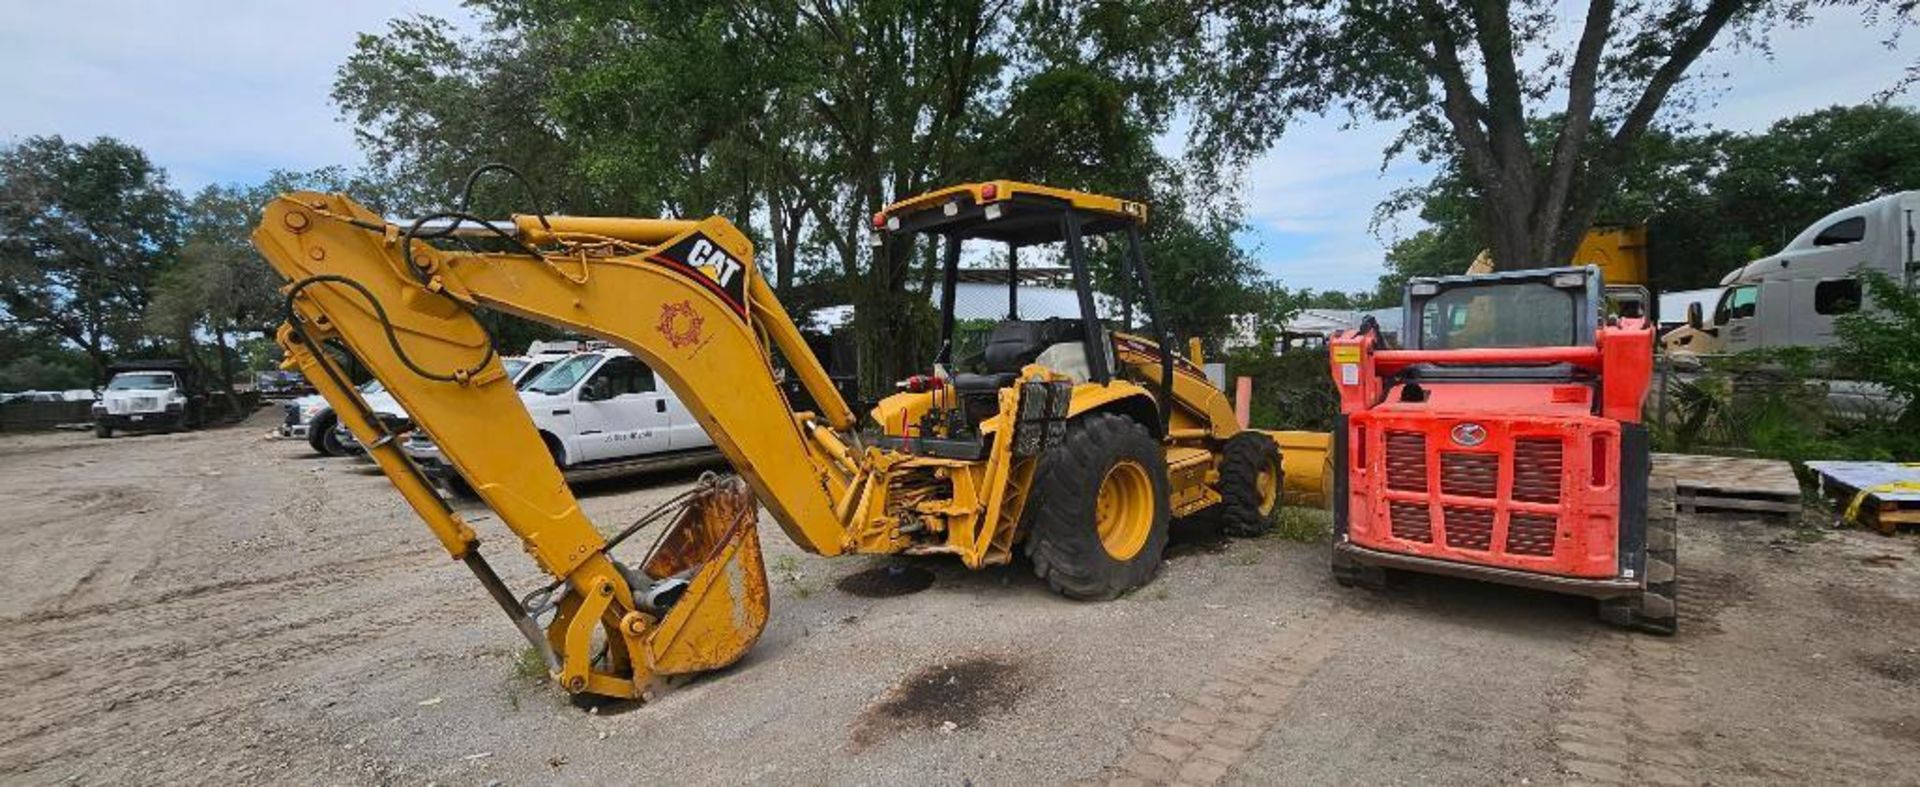 2000 Caterpillar 416C Backhoe, Turbo 4 X 4, Extendahoe, S/N 42N210581, 3,029 Hours (Located at 5910 - Image 6 of 7